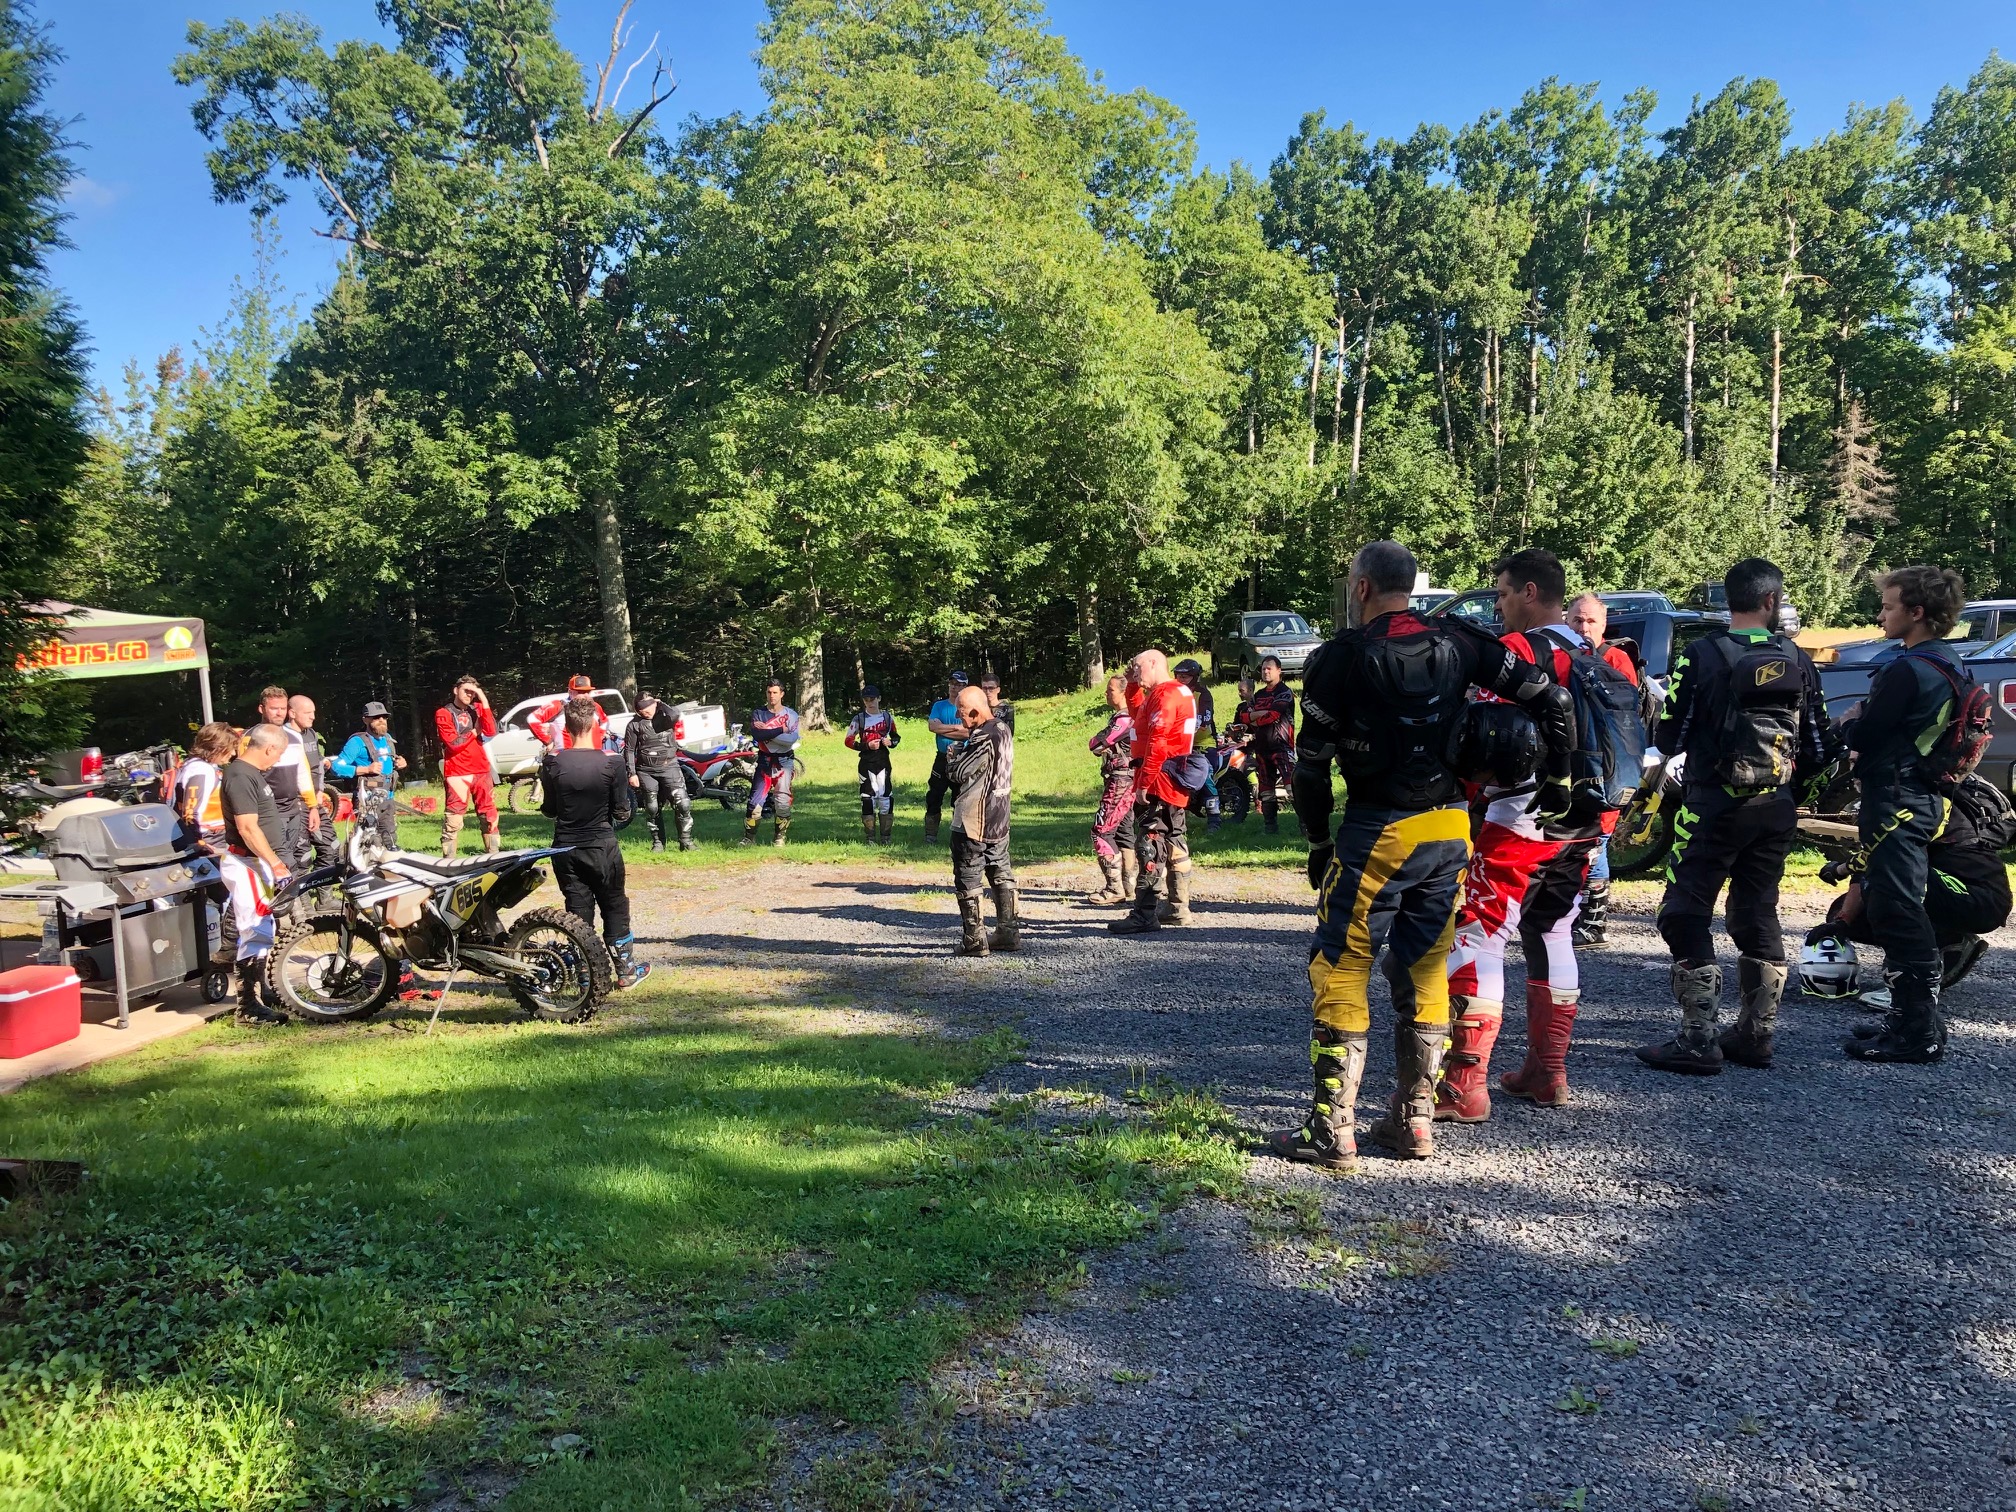 rec ride dirt bikers attend a riders meeting outside in an open space